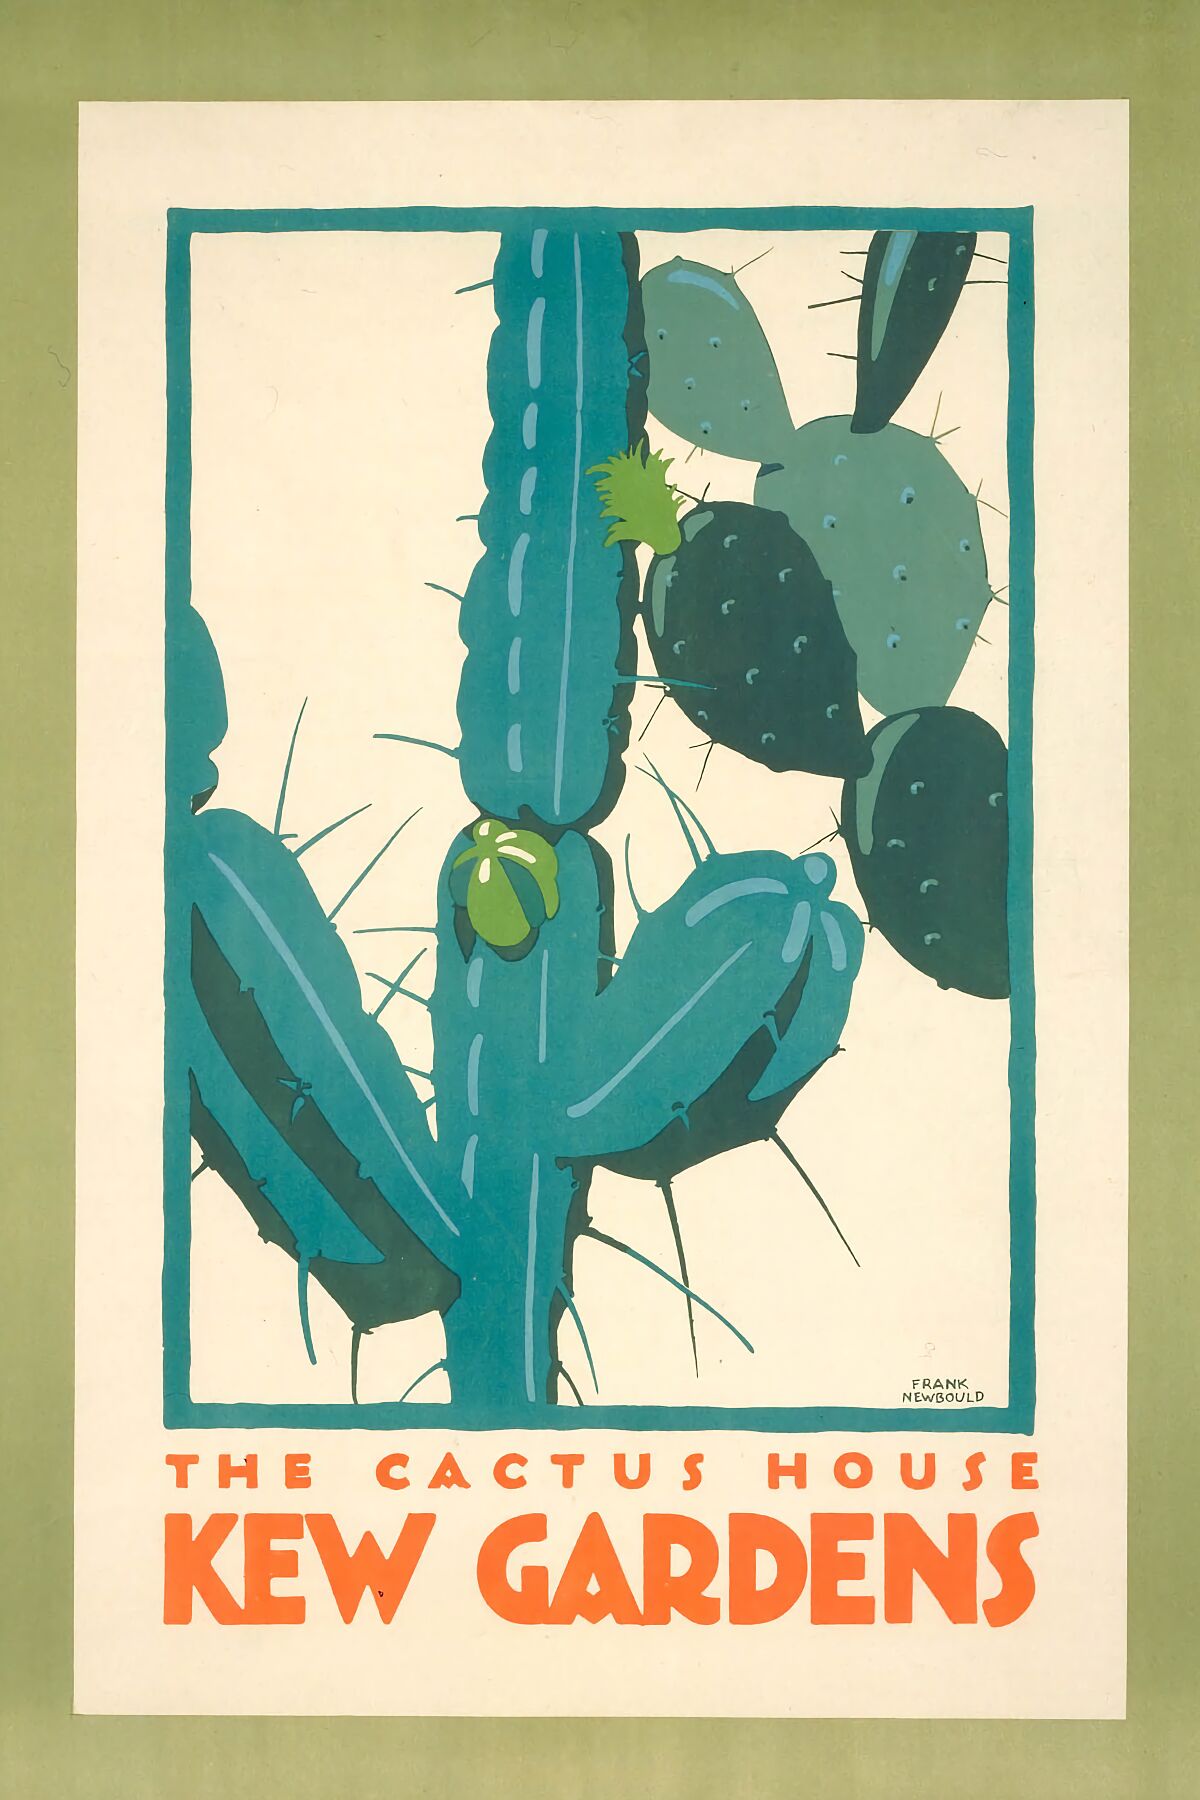 The Cactus House, Kew Gardens by Frank Newbould - 1922